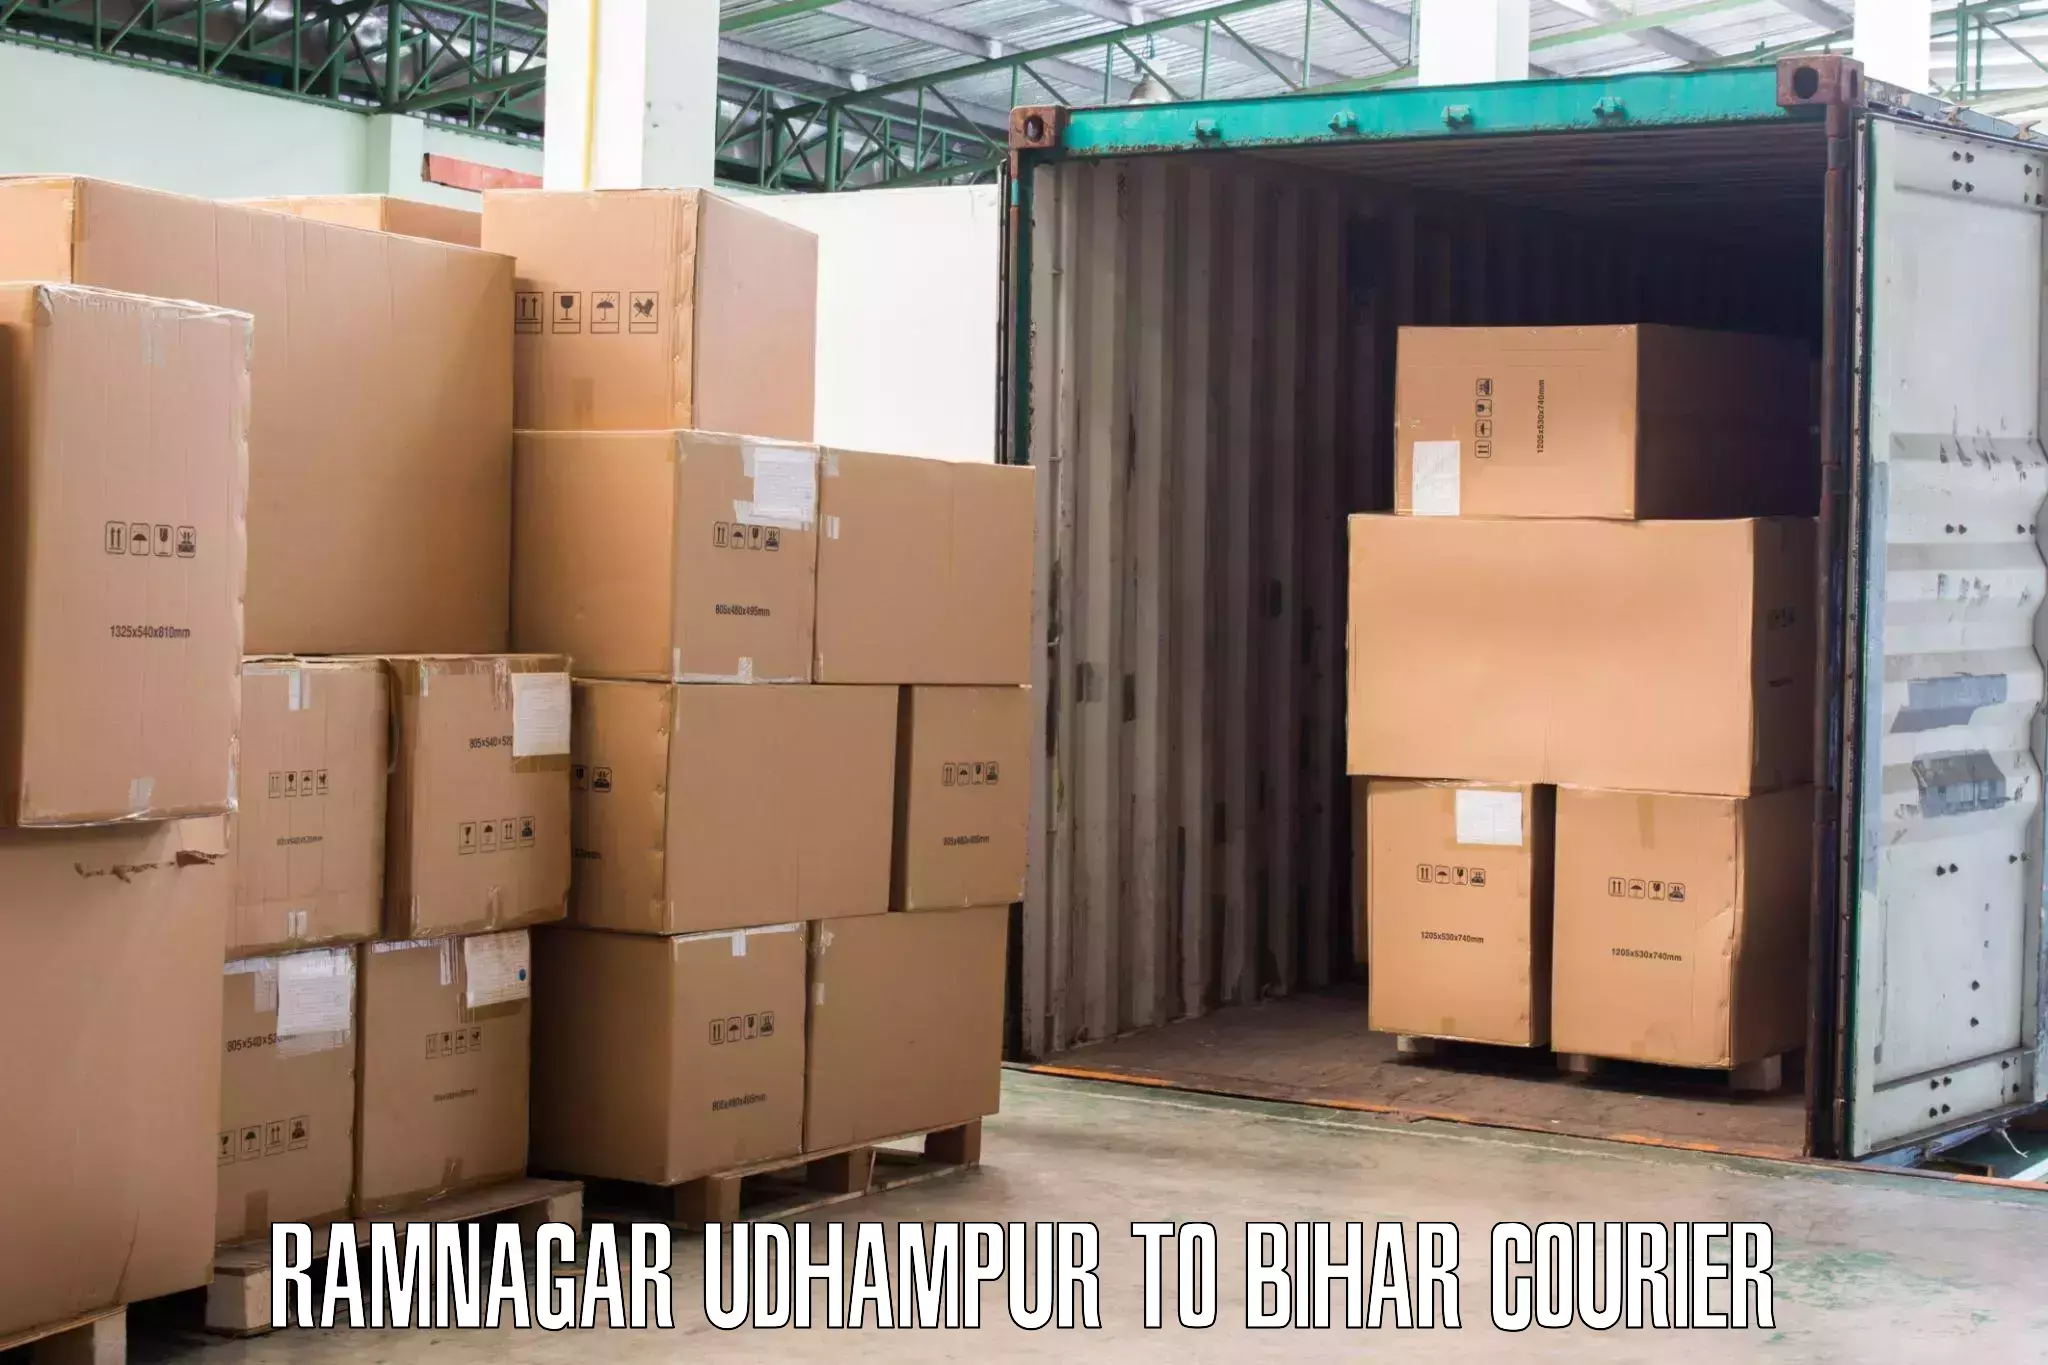 Moving and storage services Ramnagar Udhampur to Bihar